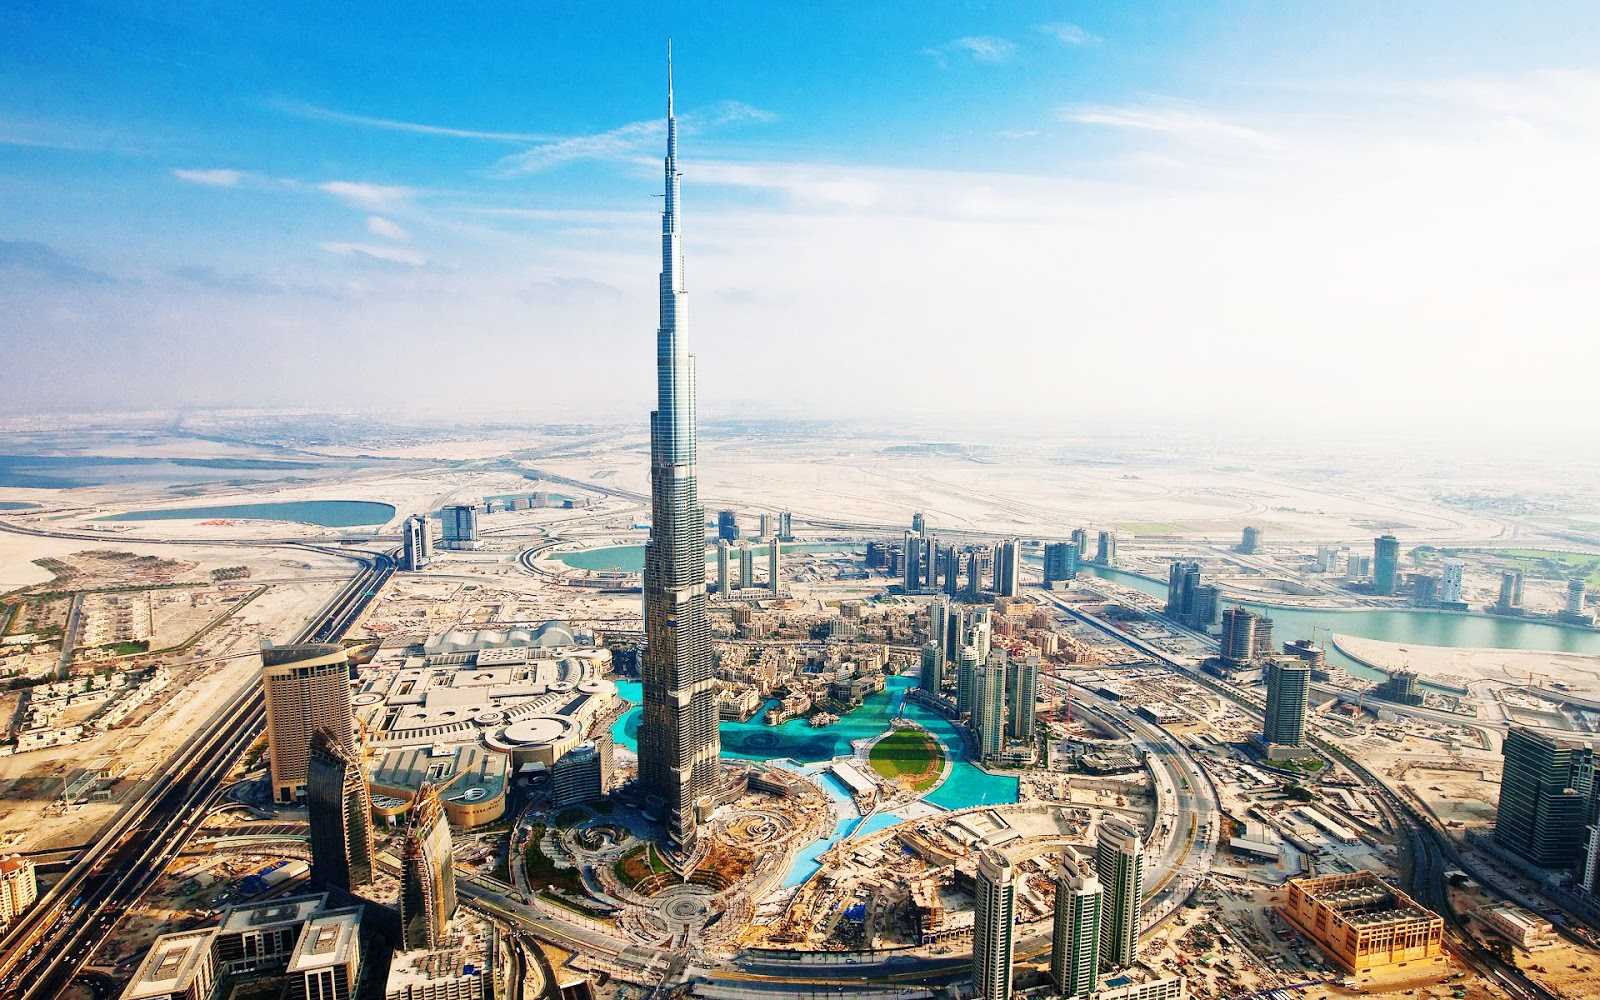 5 nights 6 days United Arab Emirates Honeymoon Tour Package with Experience IMG Worlds of Adventure: Lost Valley + Marvel Comics + Cartoon Network + IMG Boulevard